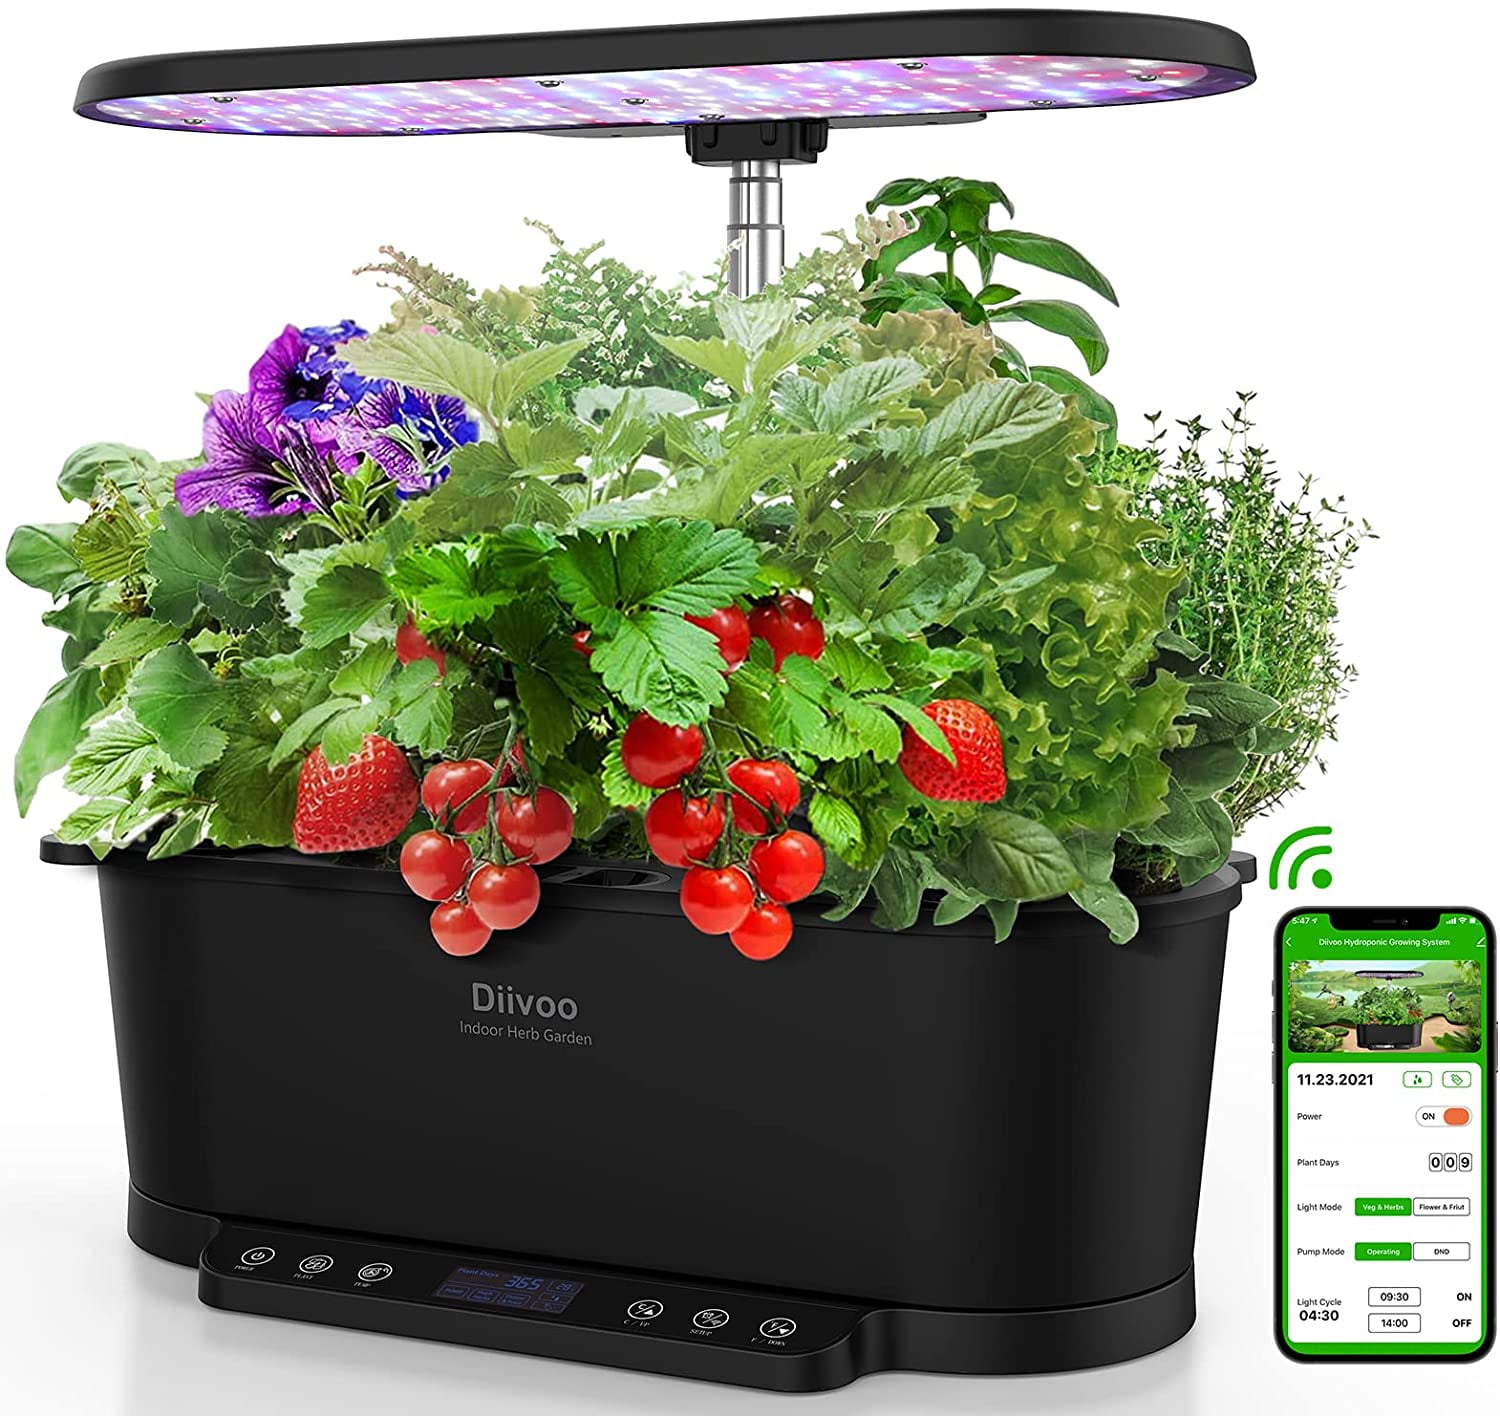 2 PLANT INDOOR HERB GARDEN DECOR HYDROPONIC GROW SYSTEM BUBBLE TUB ONLY 